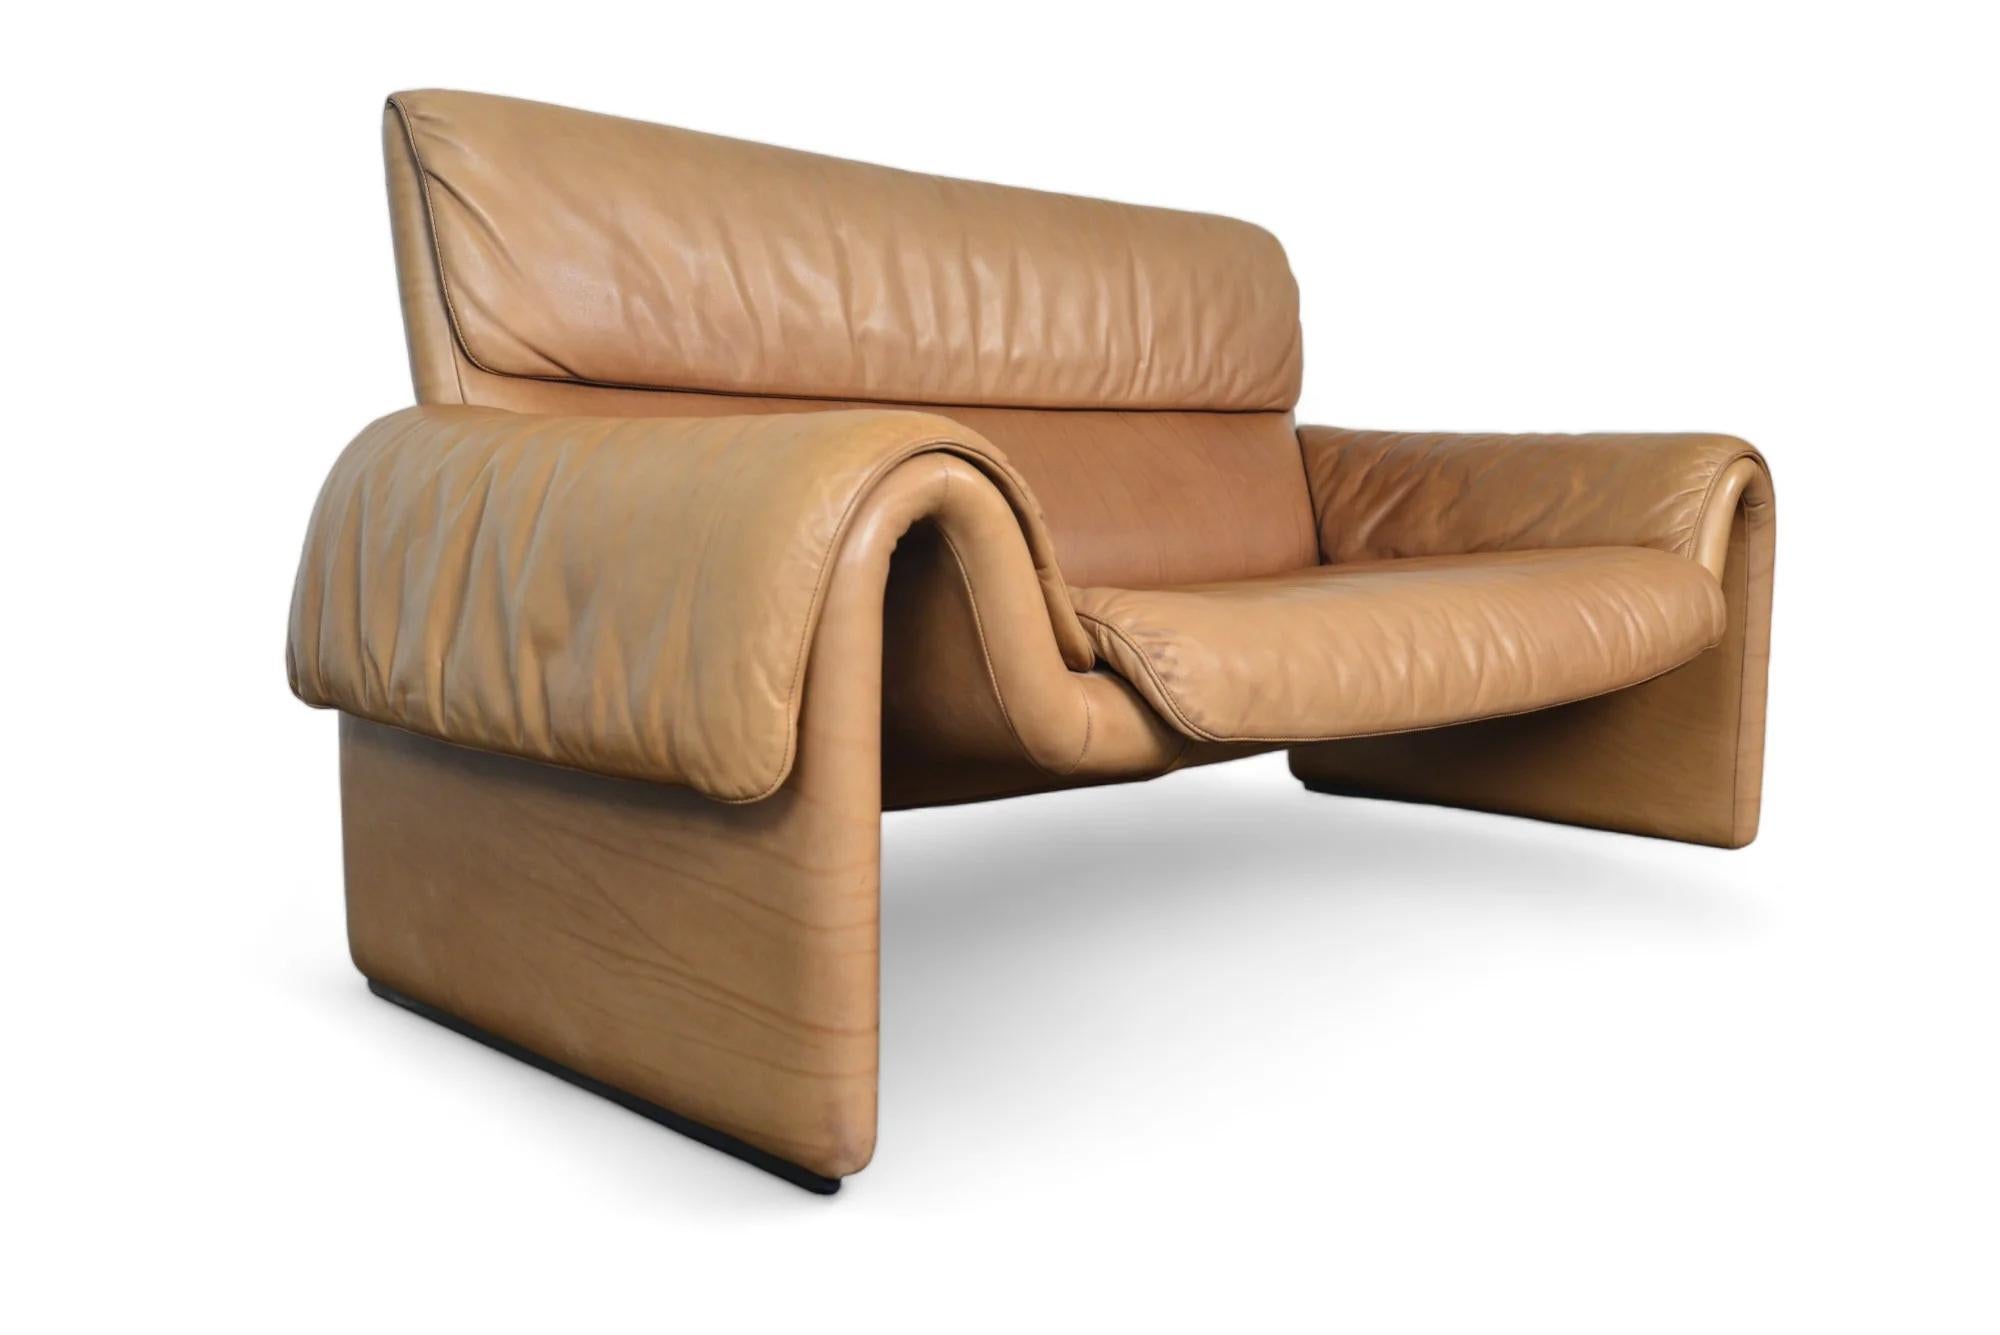 20th Century De Sede Ds-2011 Loveseat In Caramel Leather For Sale